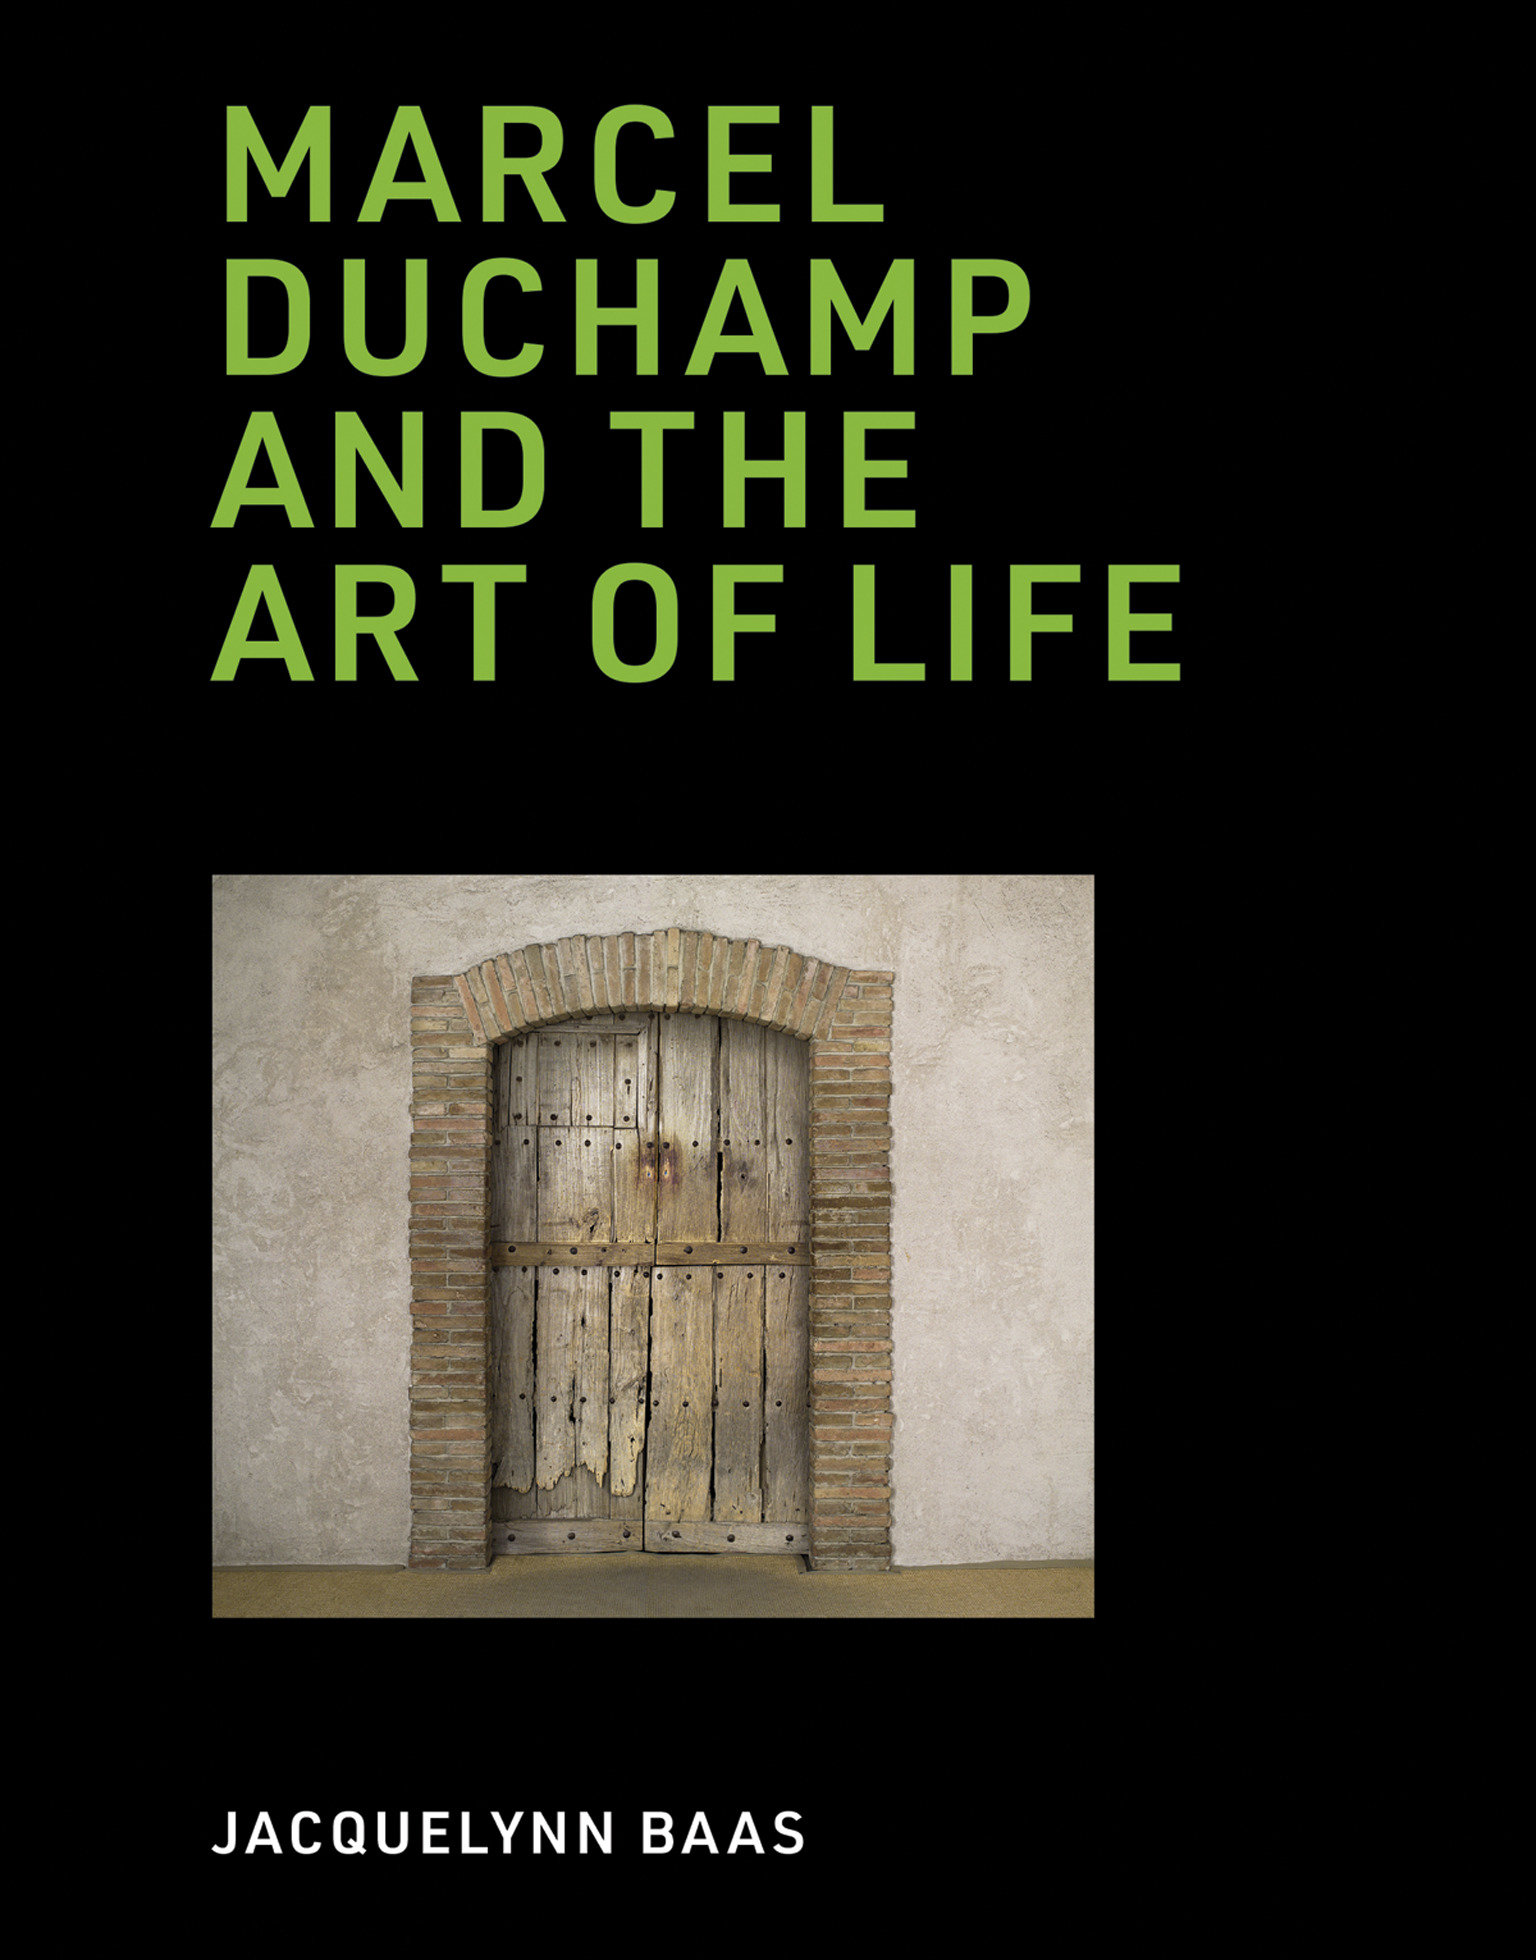 Marcel Duchamp and the Art Of Life (Hardcover Book)